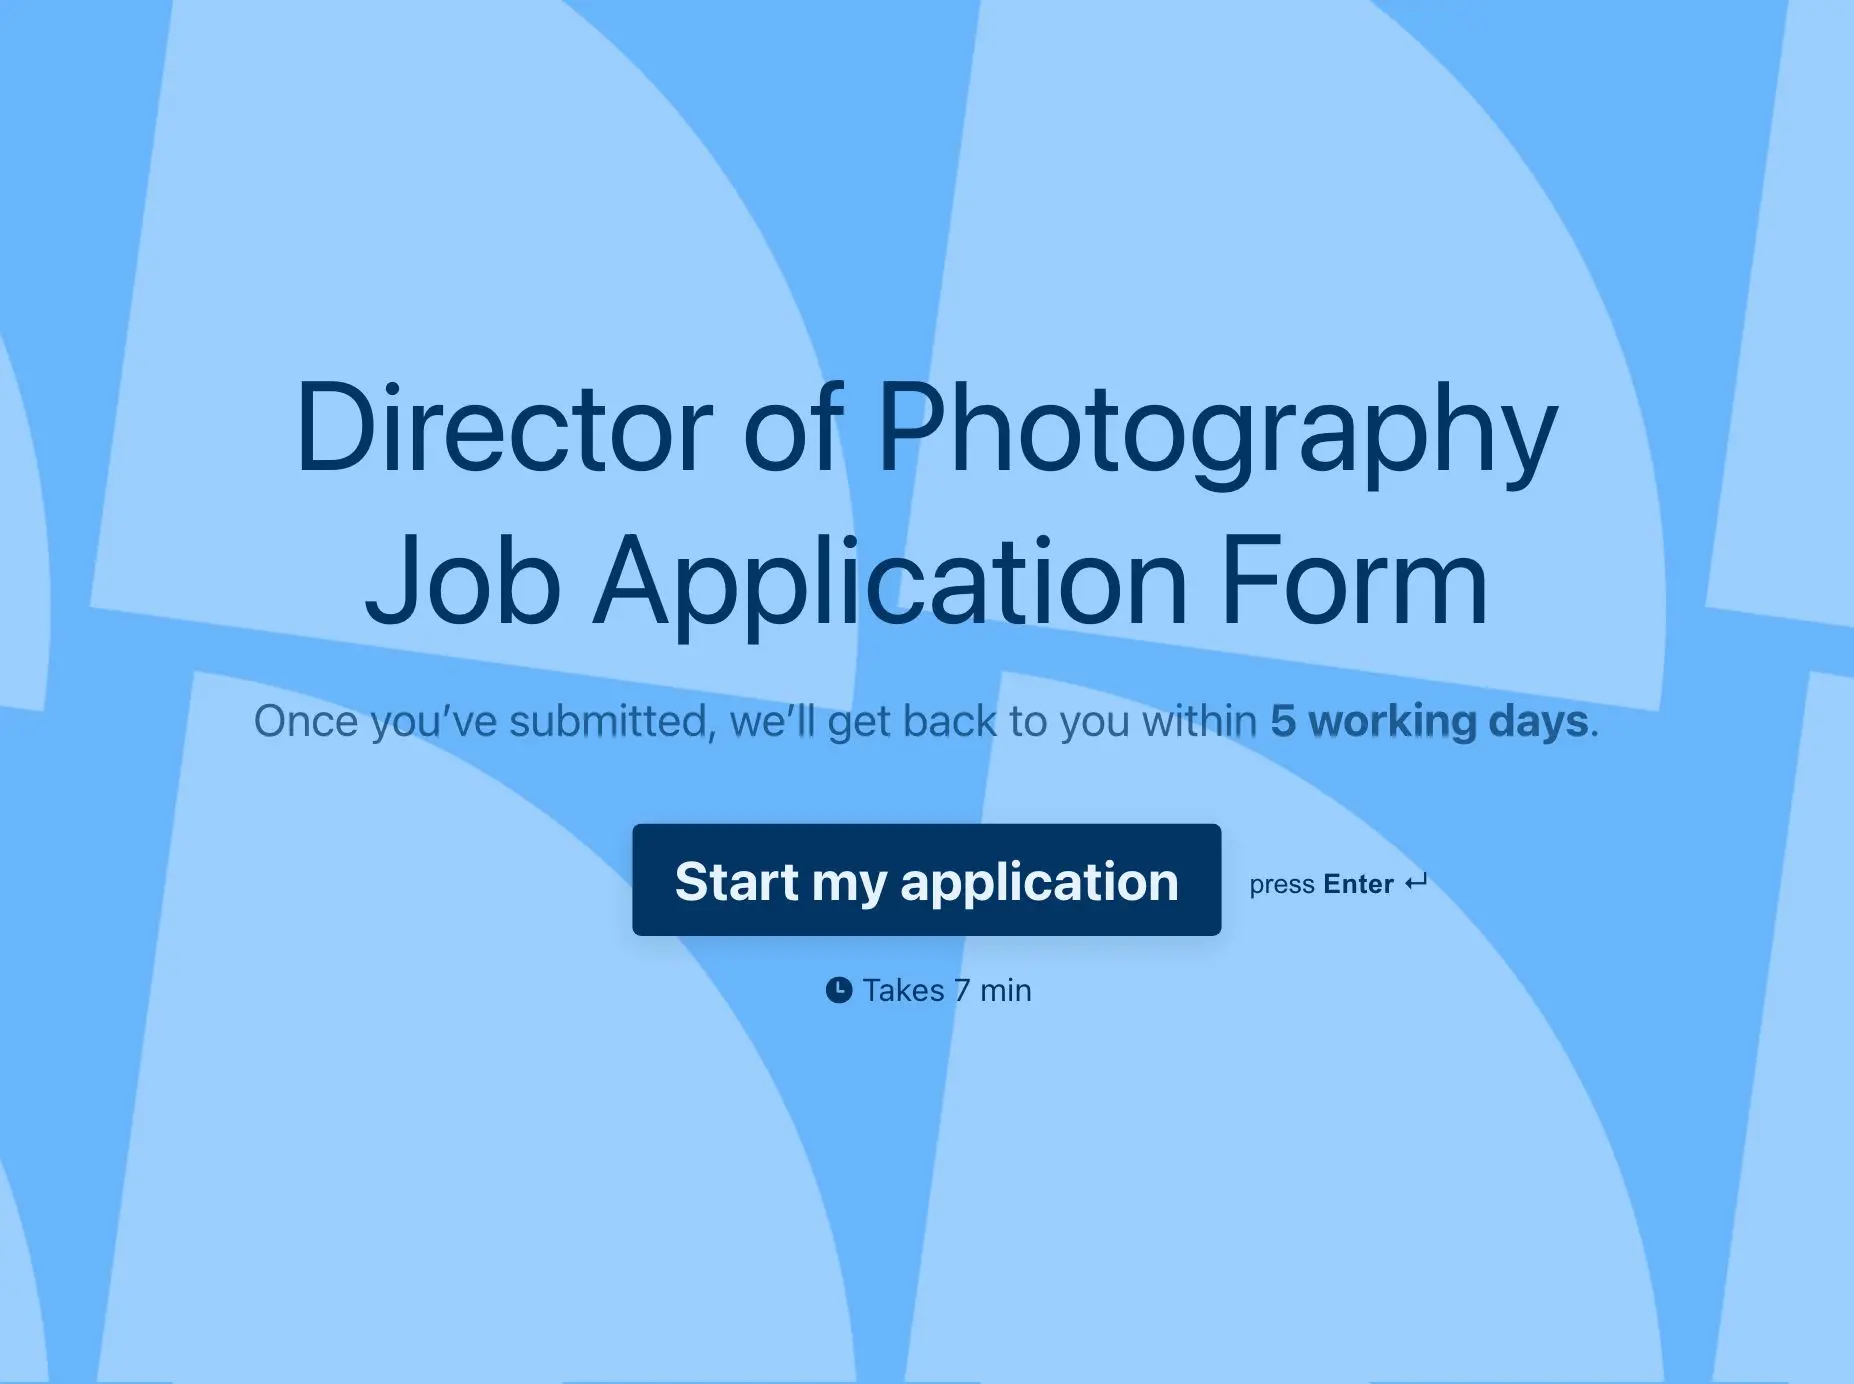 Director of Photography Job Application Form Template Hero